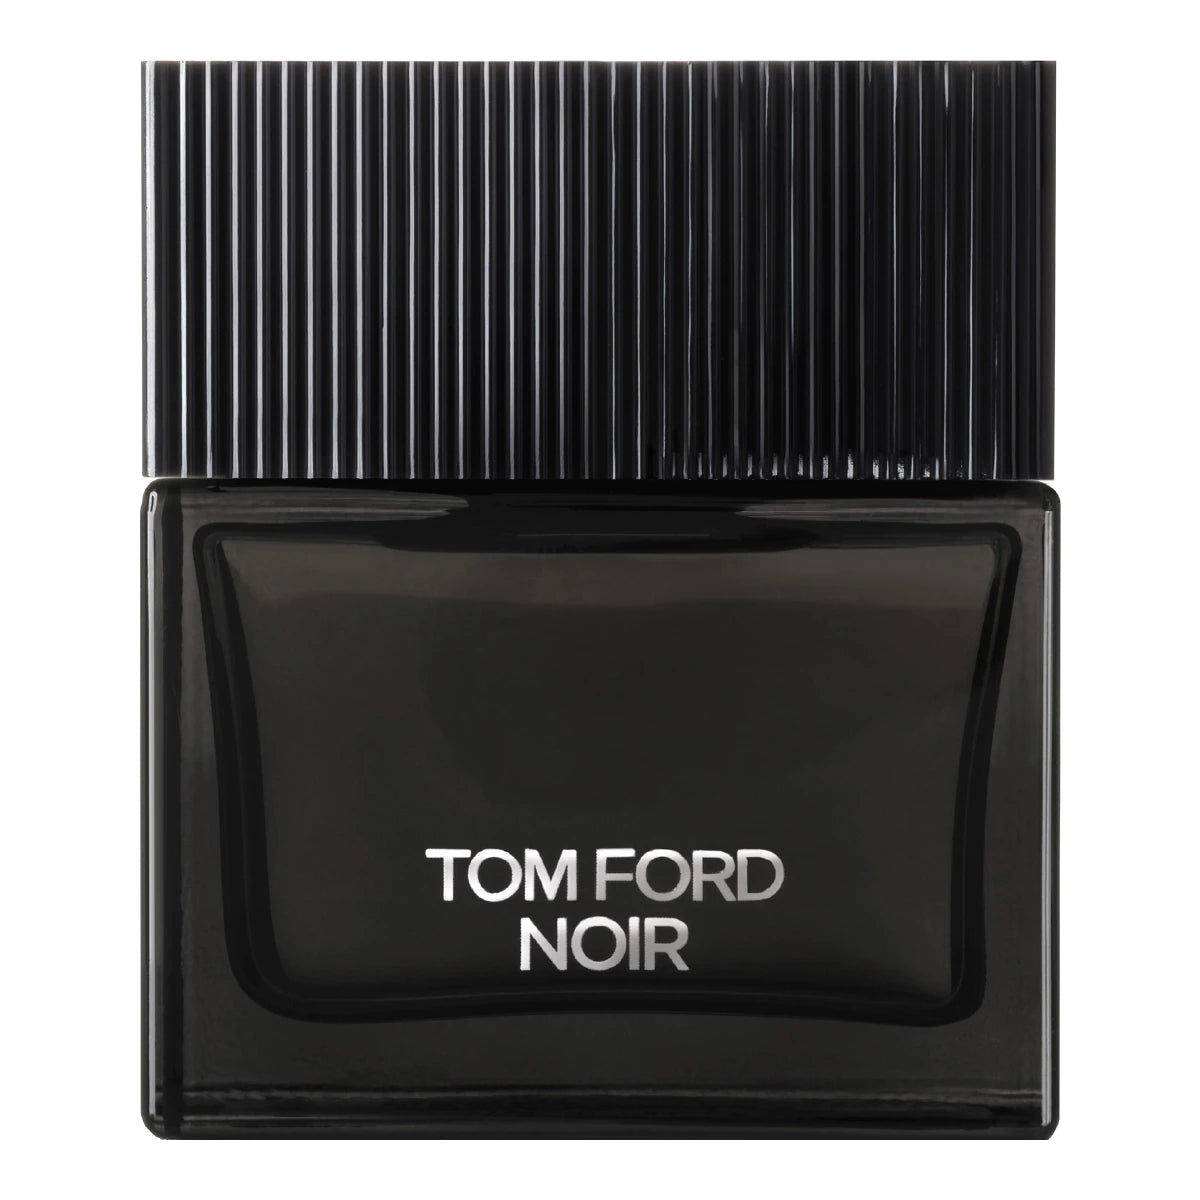 johnny picard inspired by tom ford noir    TOM FORD